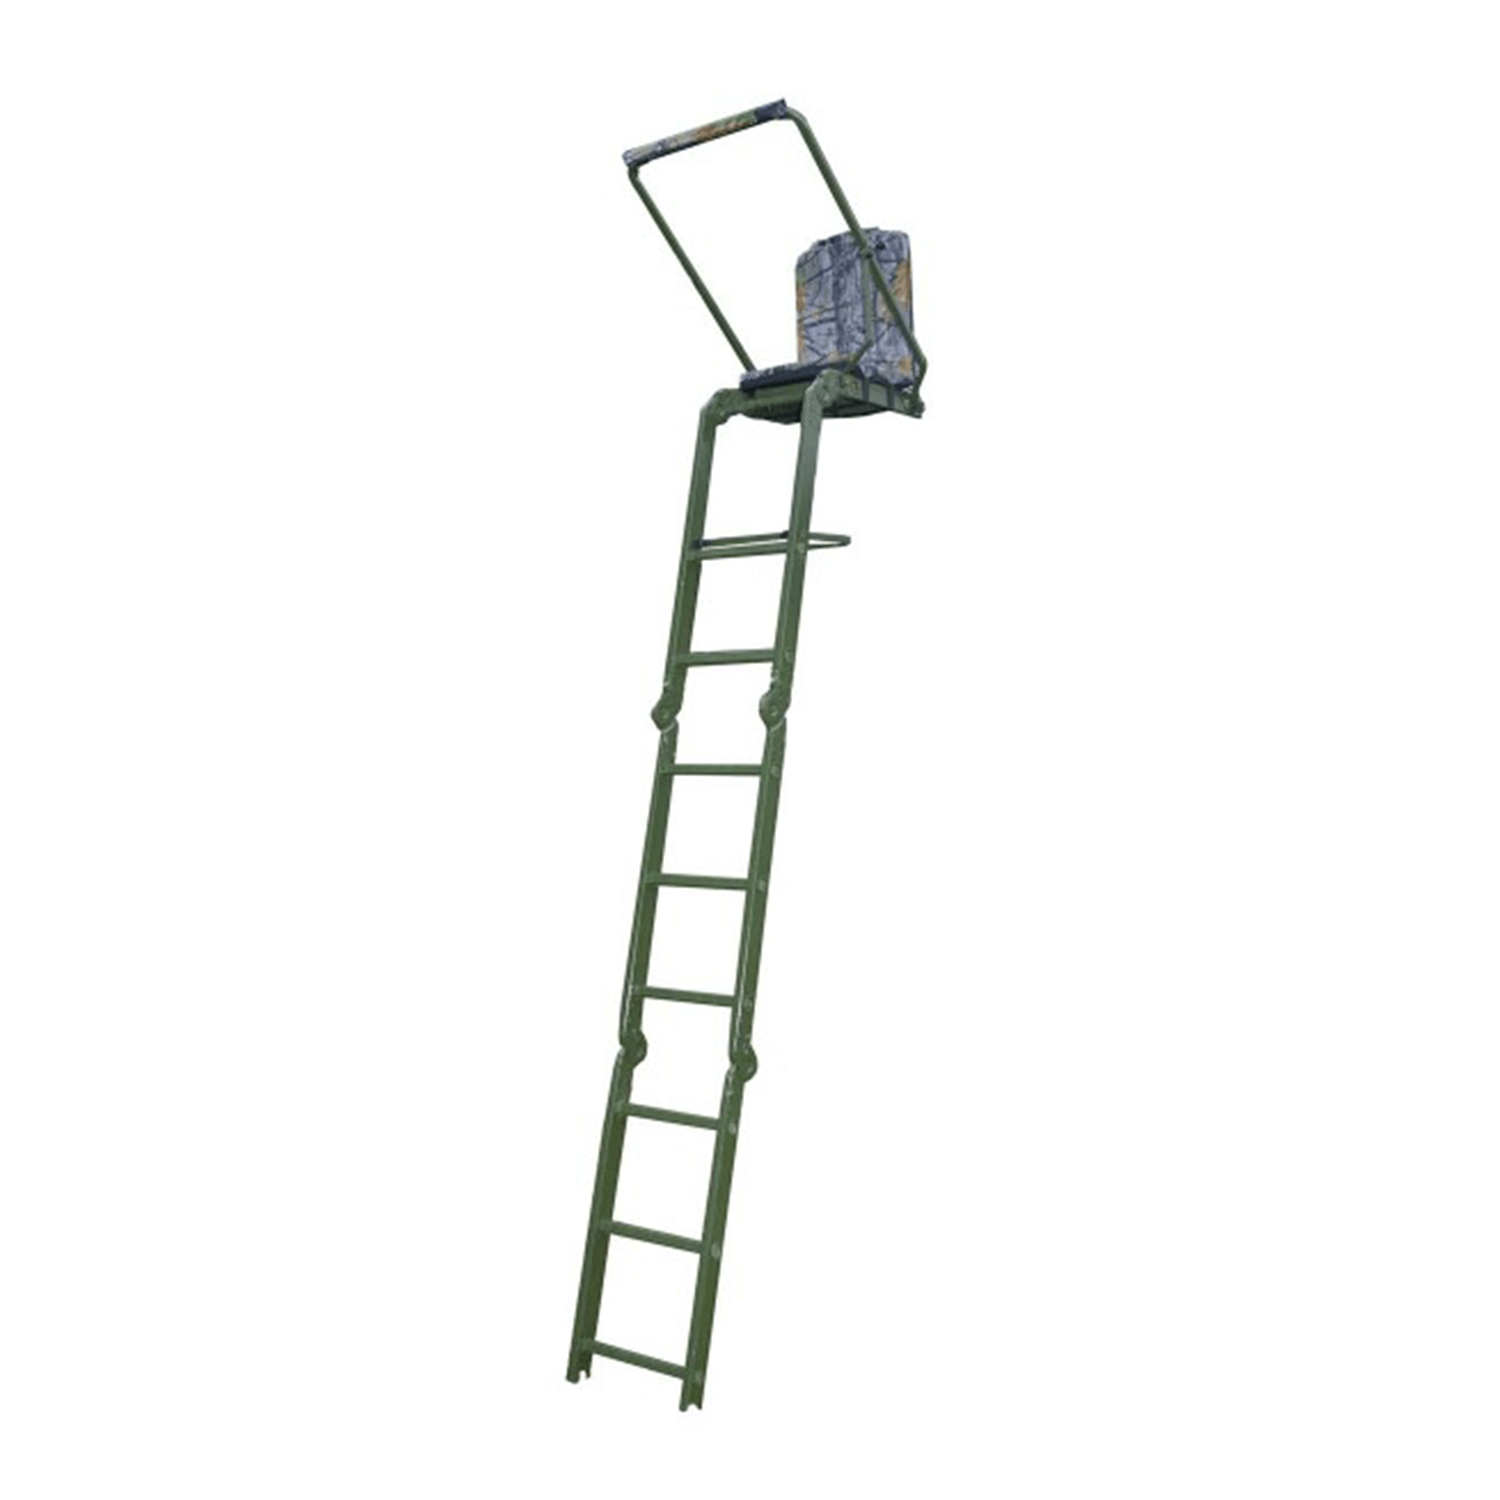 Farm-Land hunting ladder foldable - Hunting Accessories